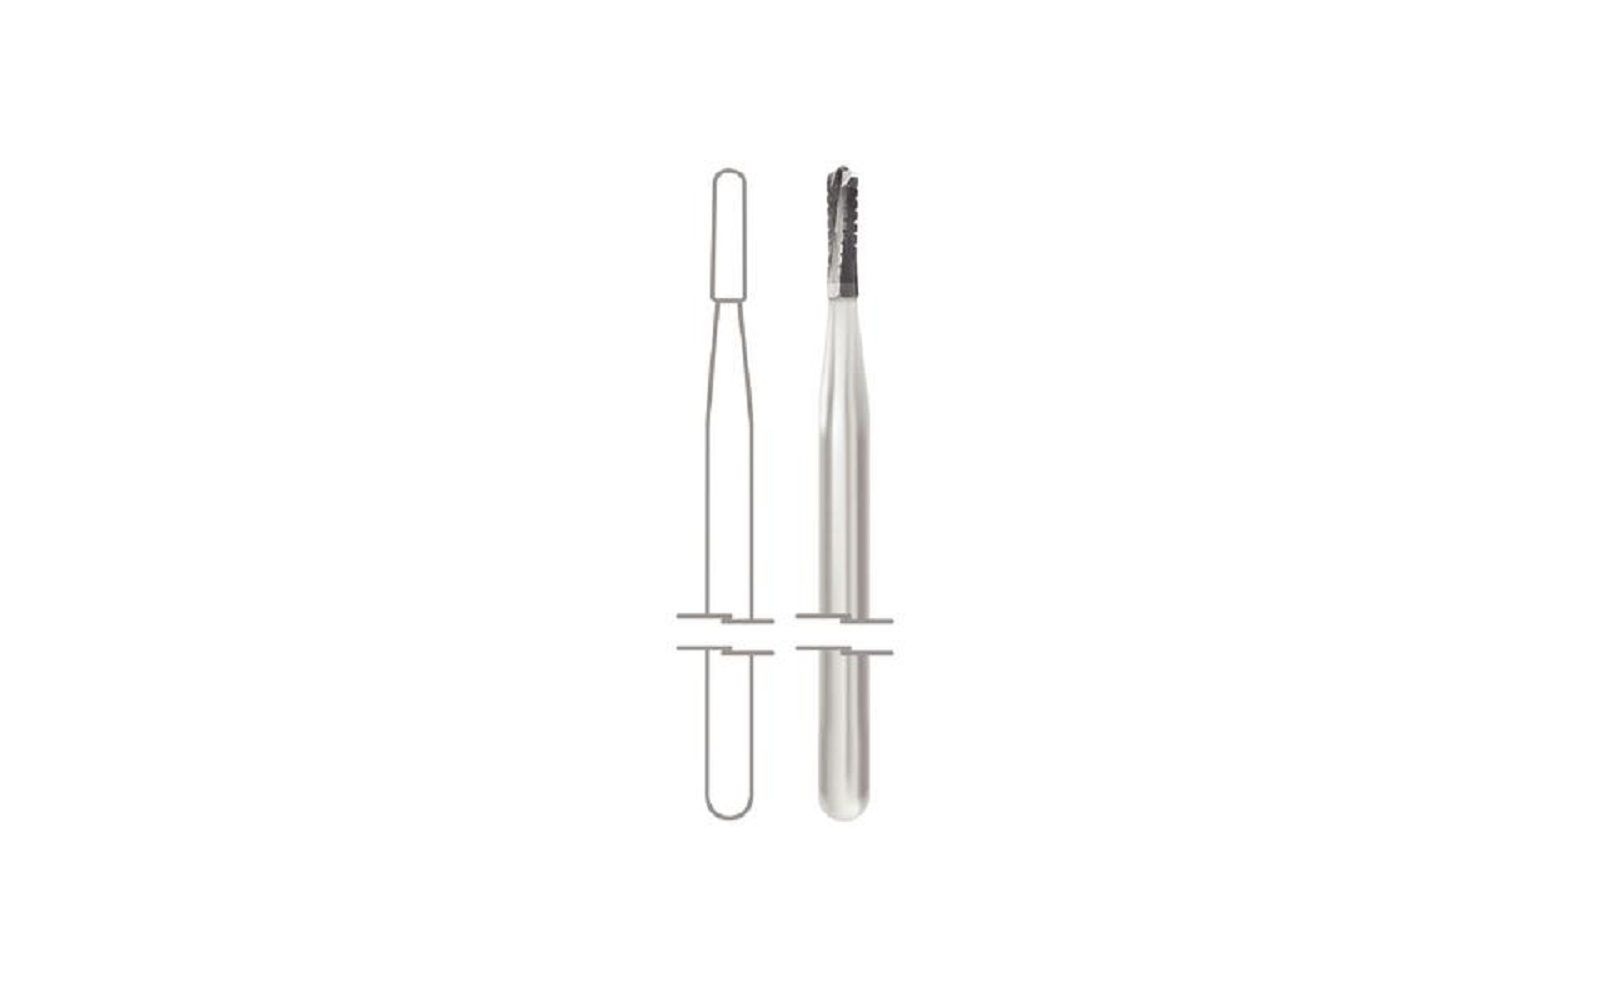 Midwest® operative carbide burs – hp, straight fissure